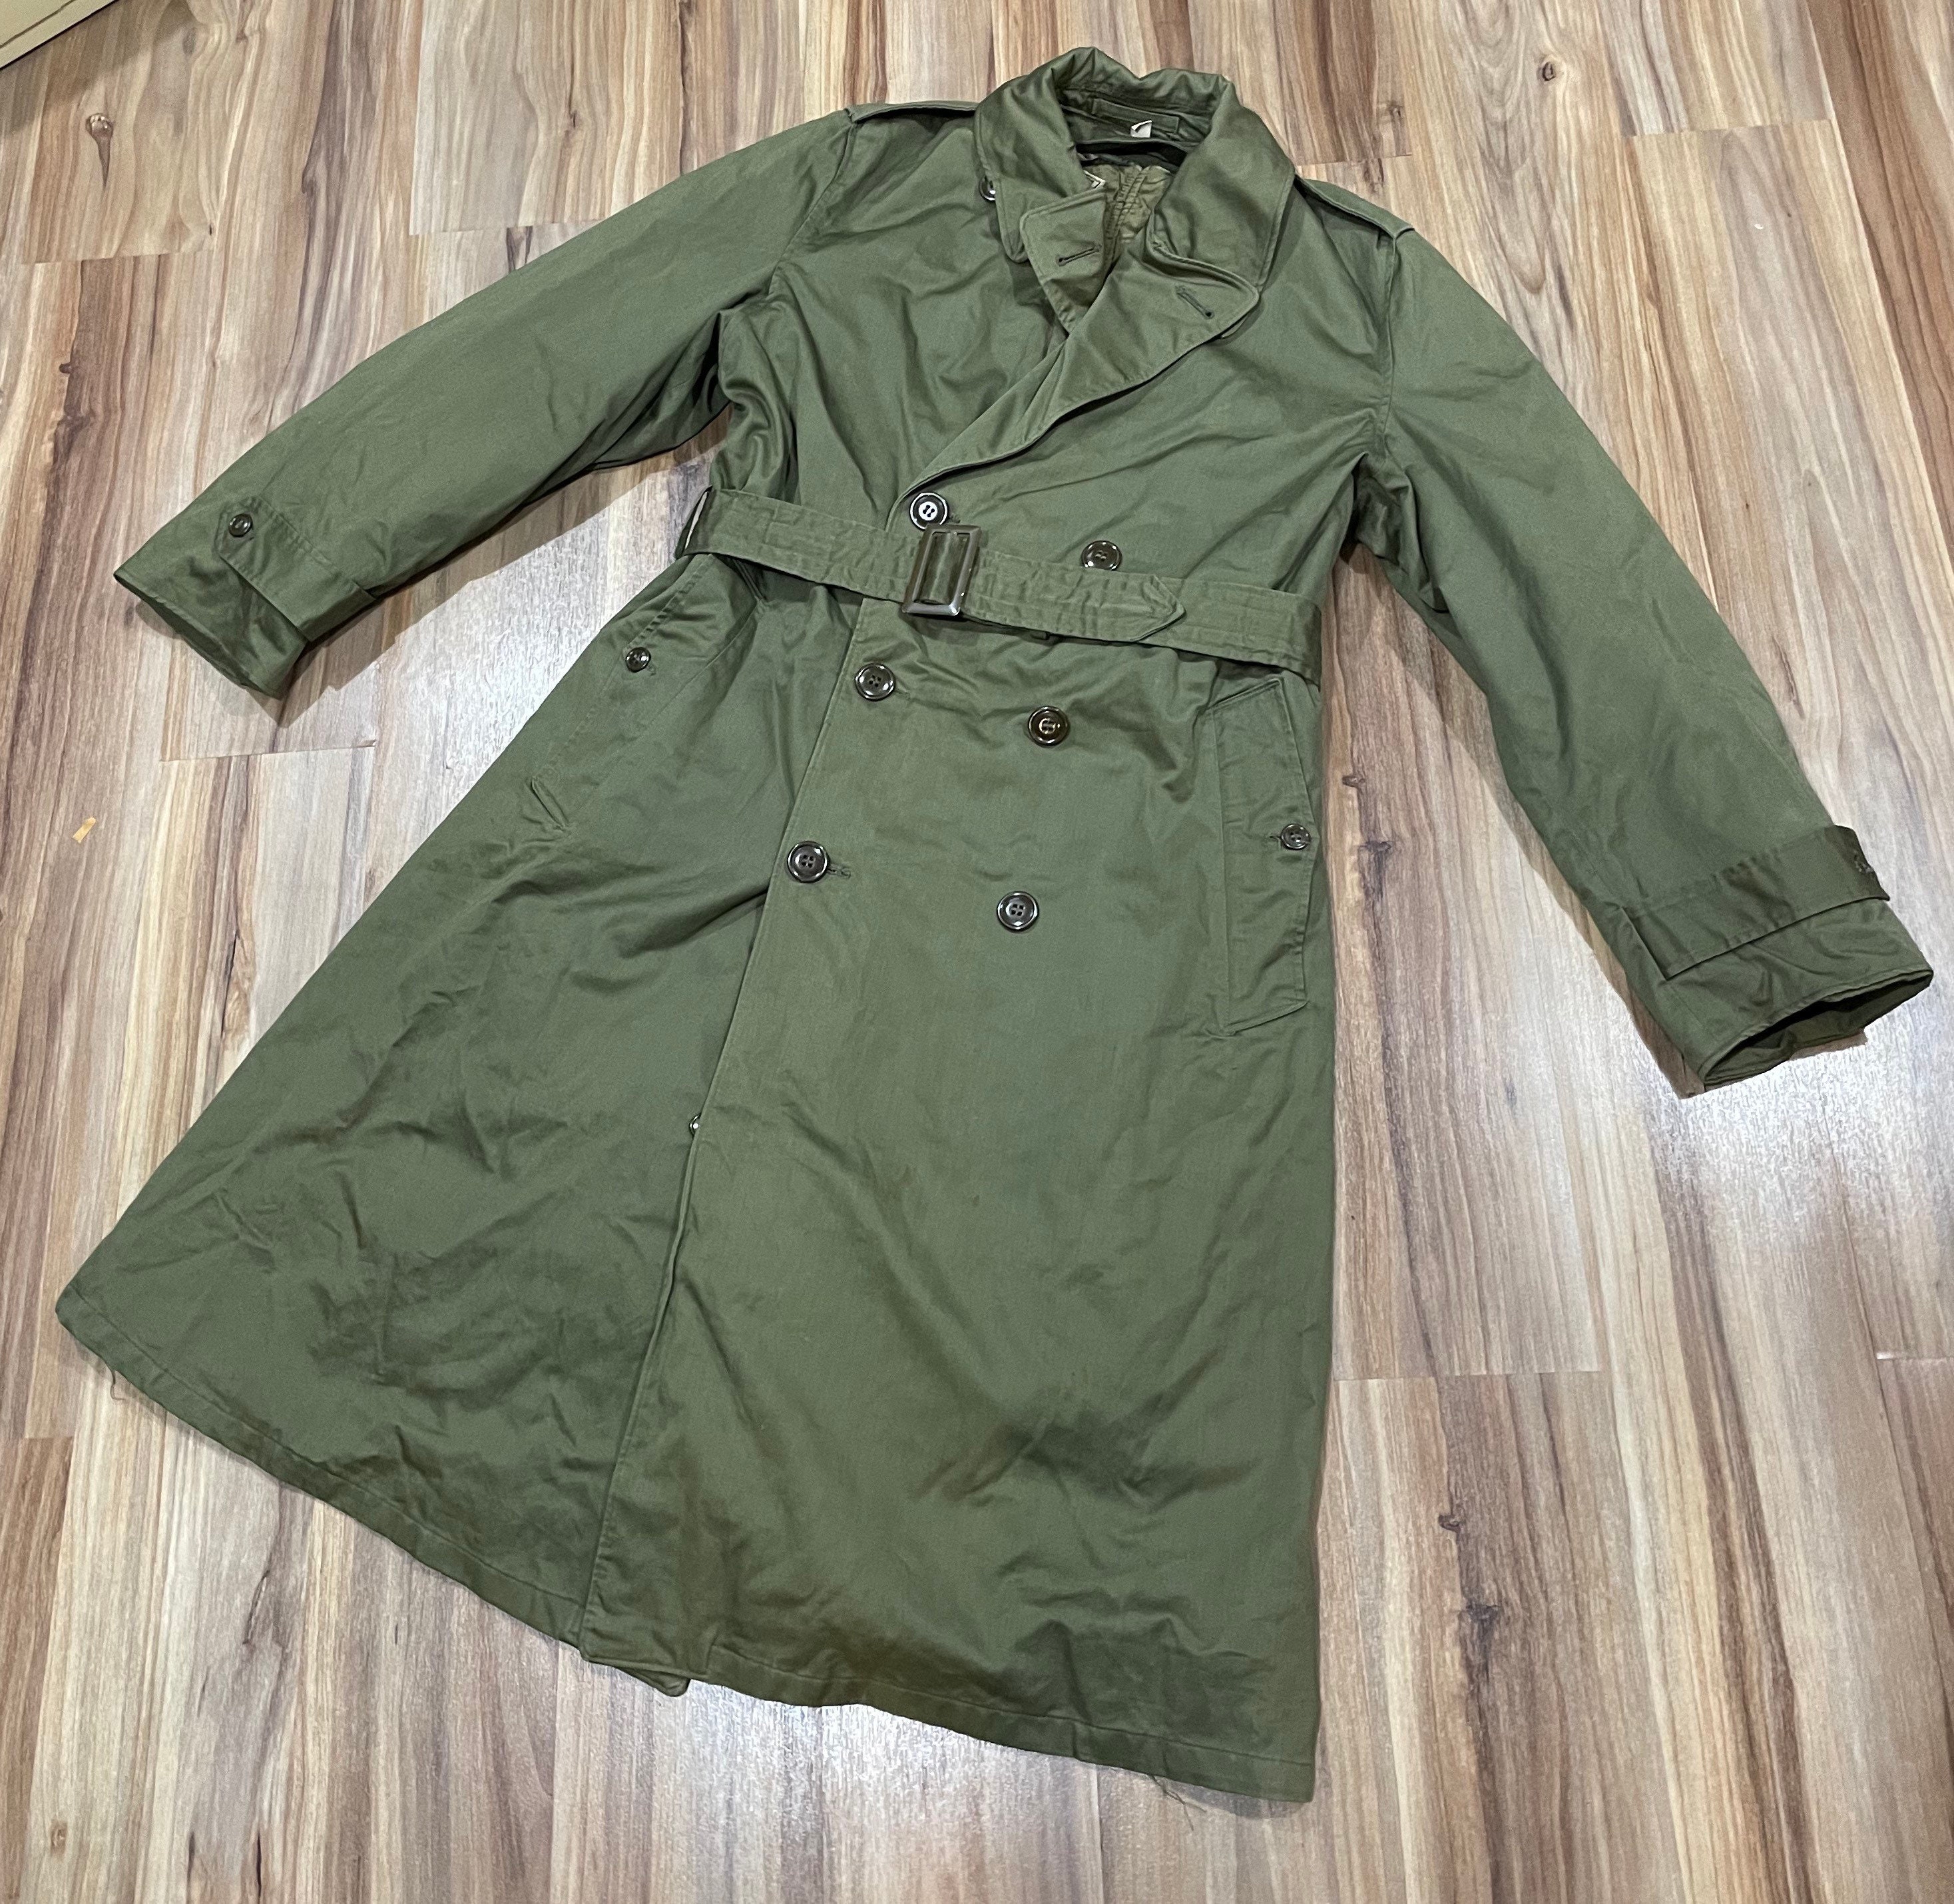 Get in Liner: Milsurp Liners That Double as Outerwear – Put This On